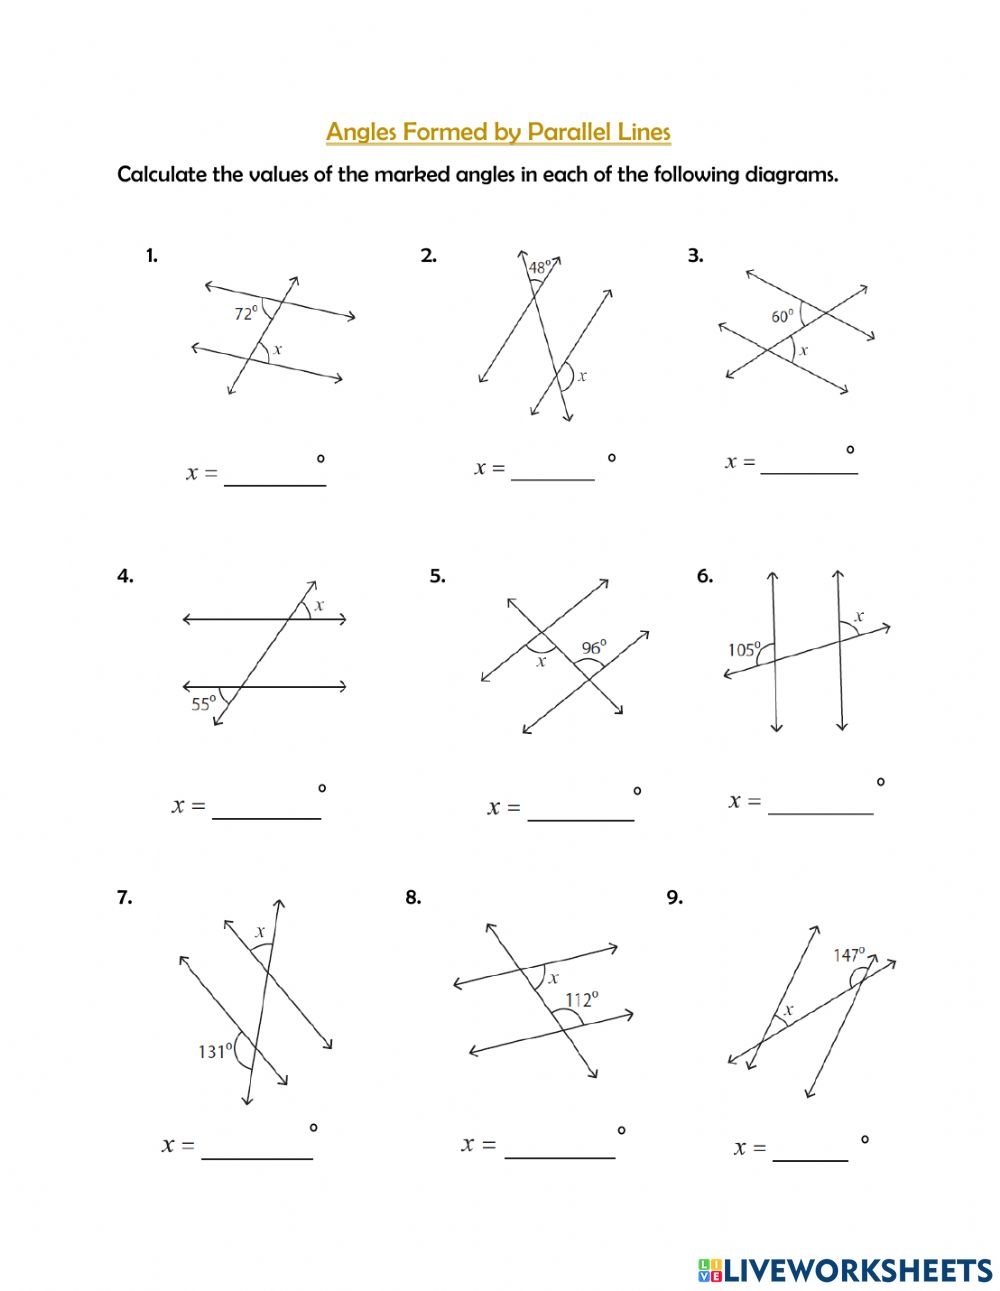 milliken-publishing-company-worksheet-answers-mp3497-angles-formed-by